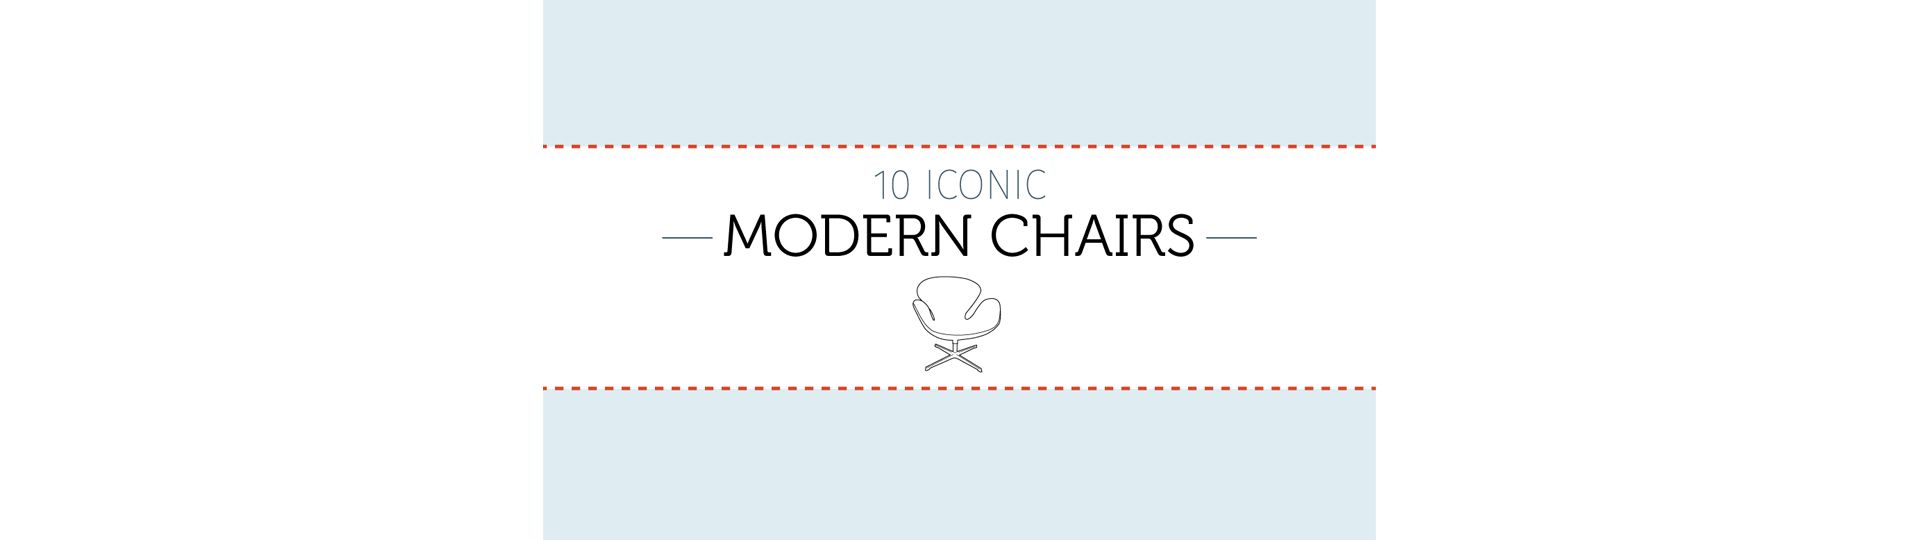 10 Iconic Modern Chairs